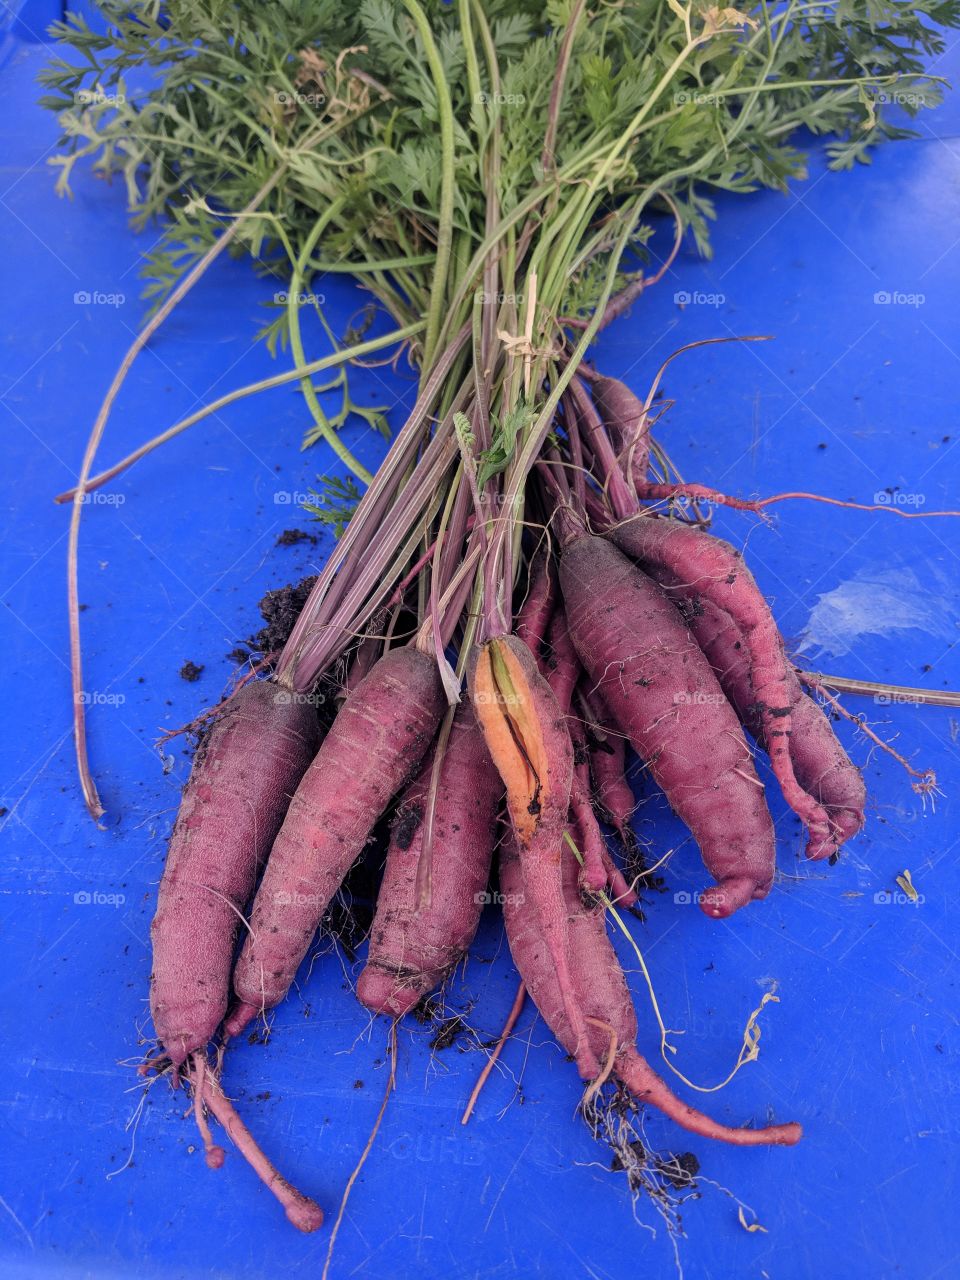 Just harvested red carrots